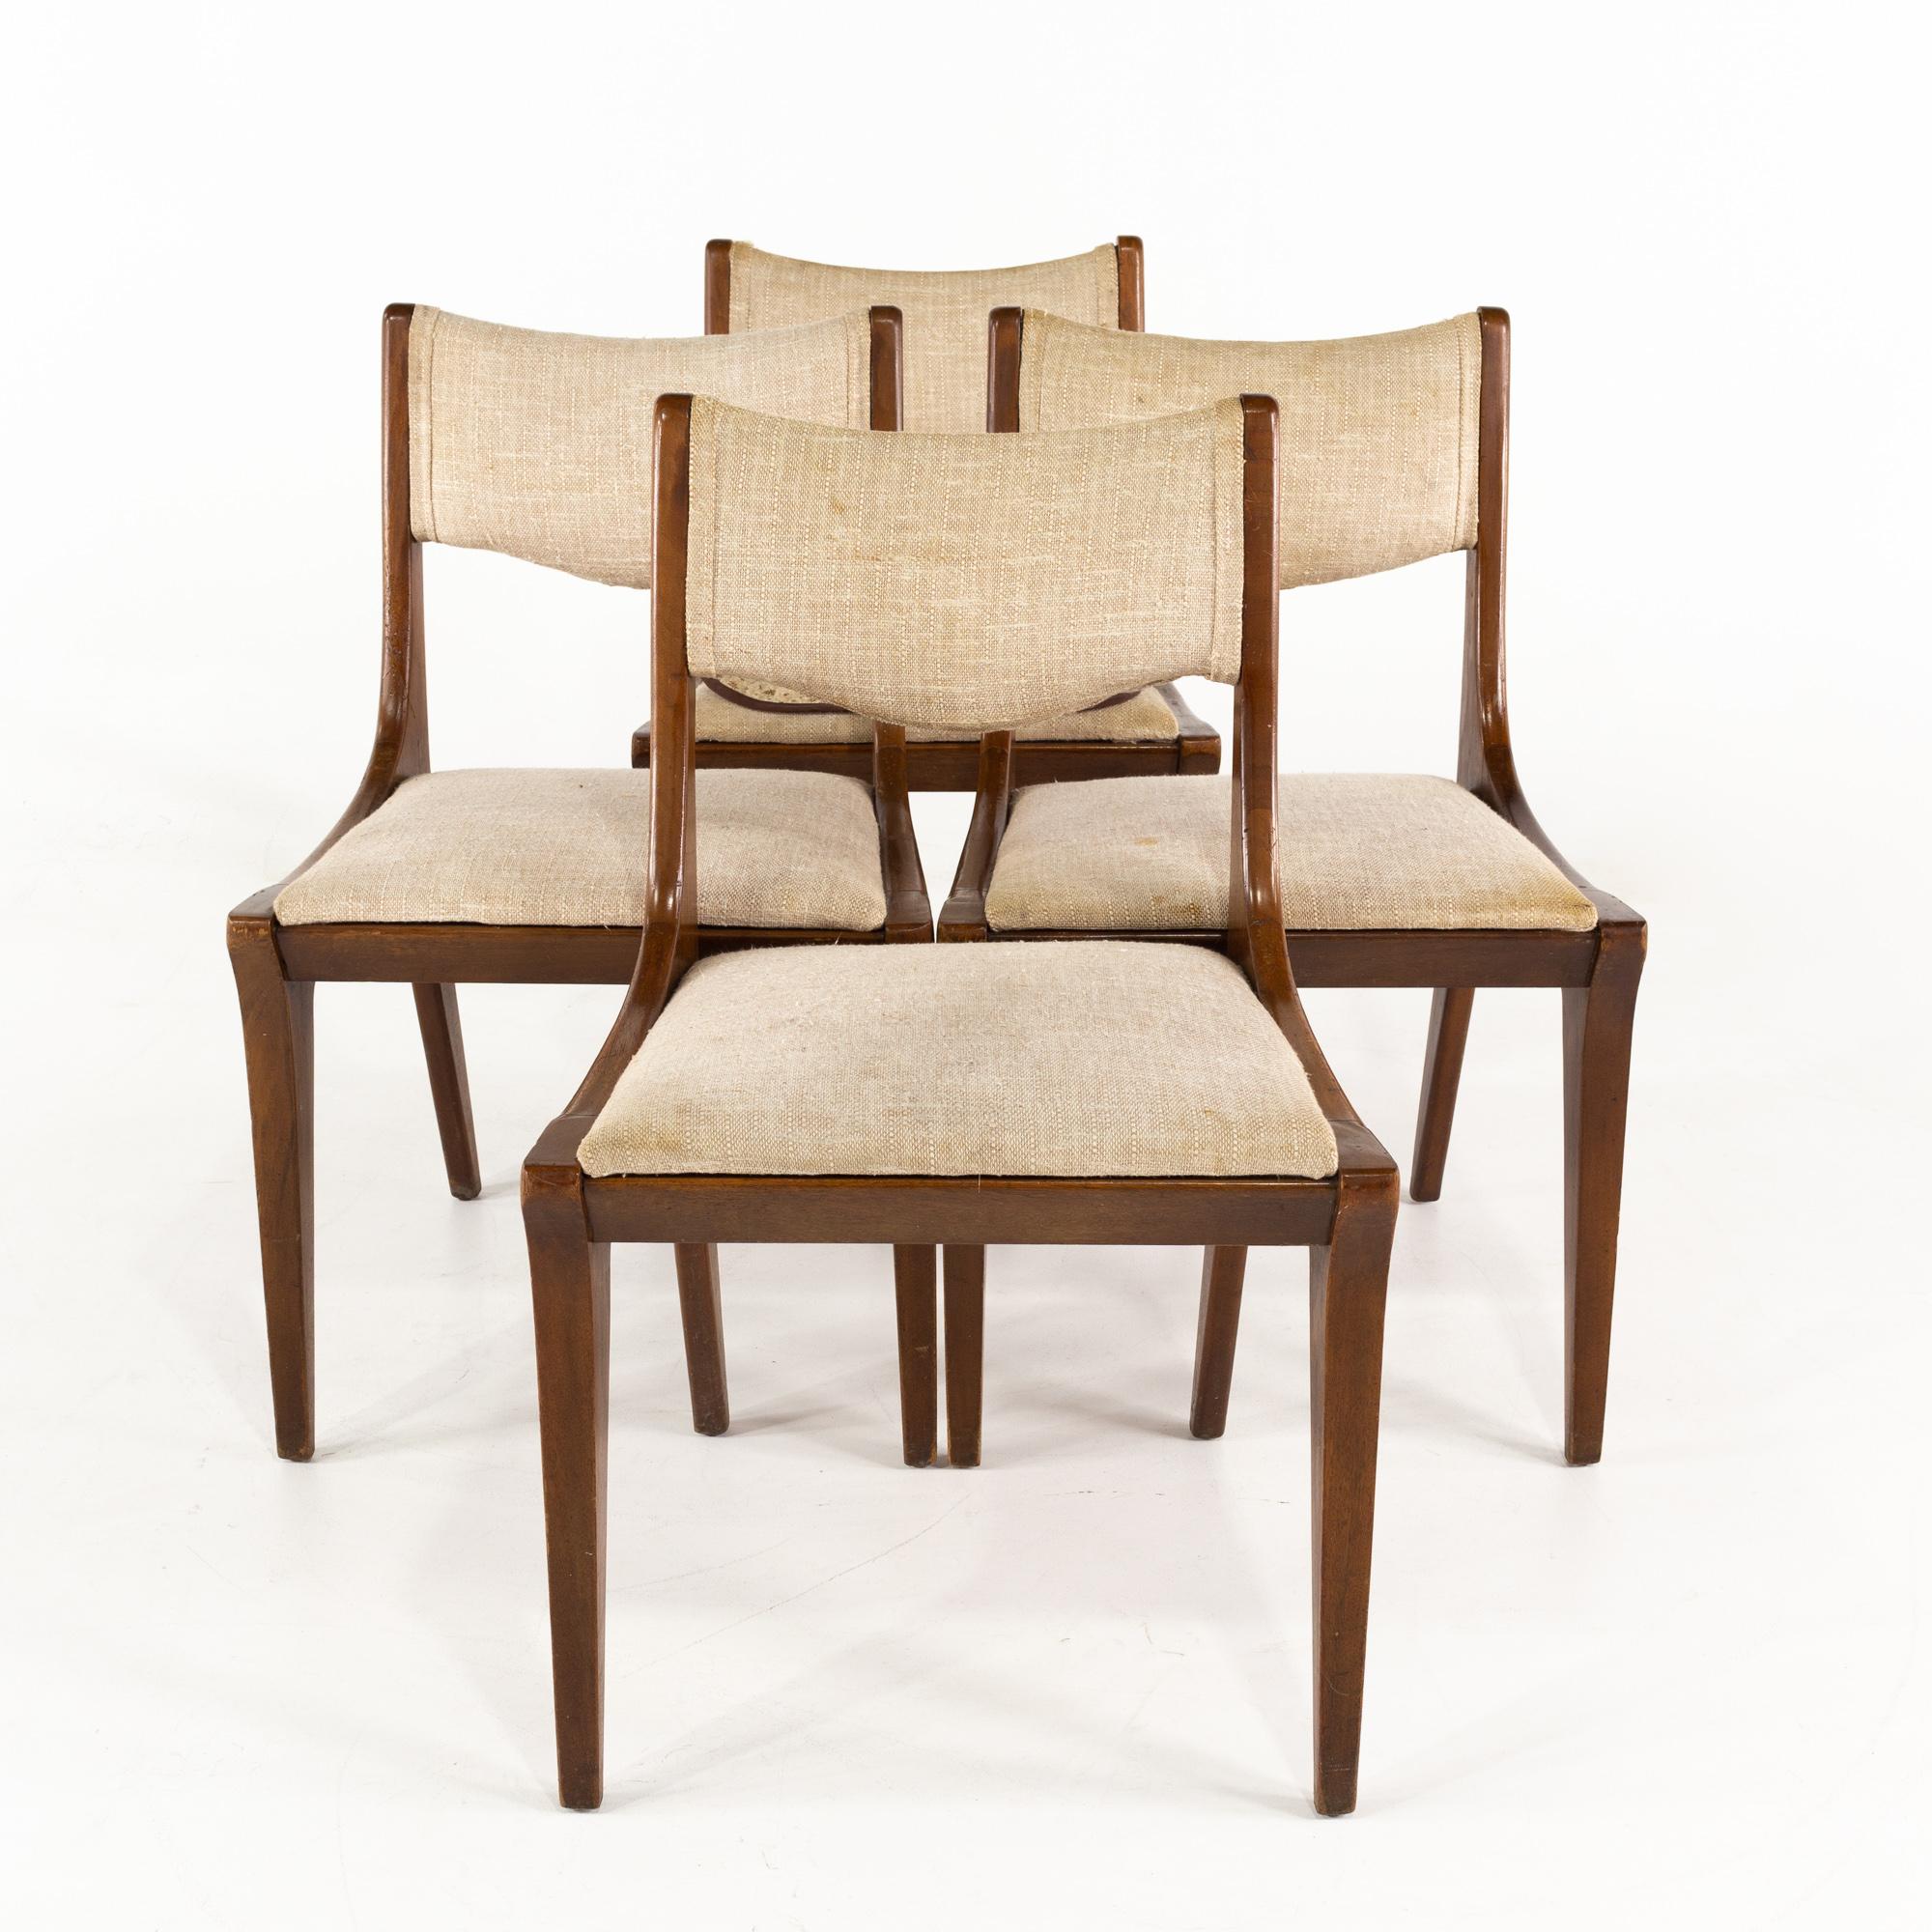 Drexel Dateline Mid Century Dining Chairs - Set of four 

Each chair measures: 21 wide x 19 deep x 33 inches high, with a seat height of 18.5 inches

Ready for new upholstery.  This service is available for an additional fee.

All pieces of